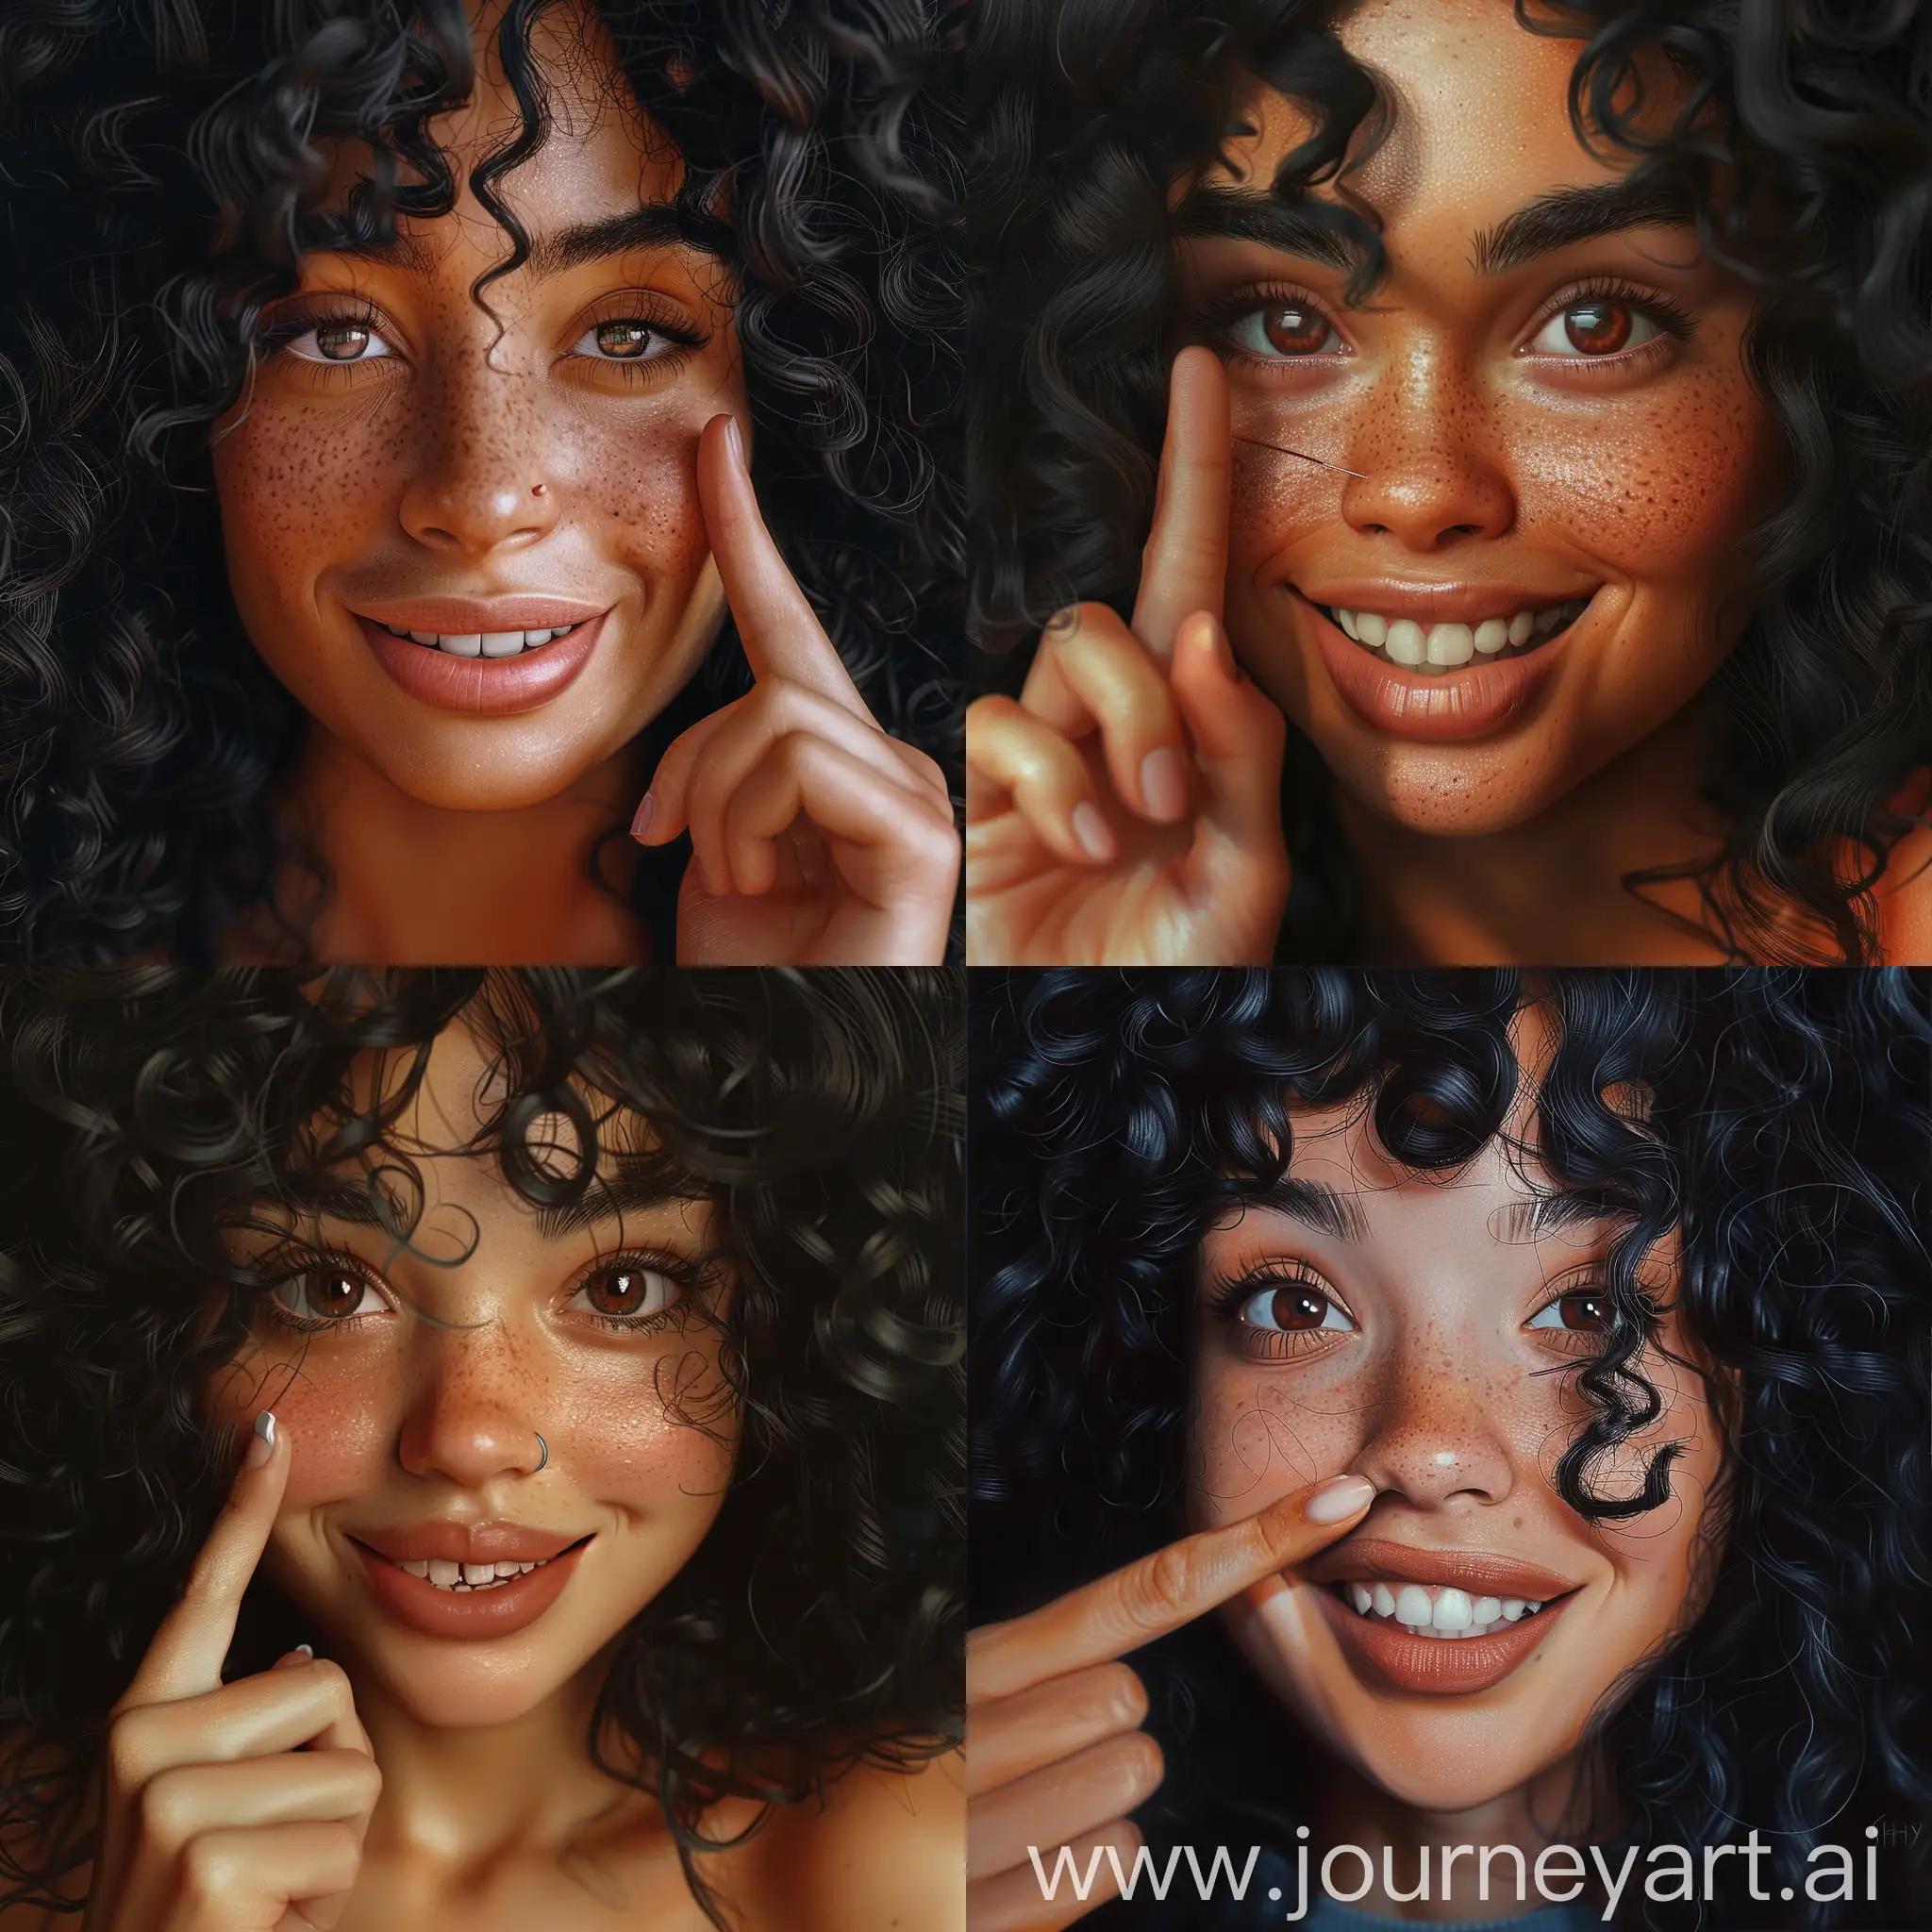 Ultra-realistic full-face, full-body photorealistic image of a 23-year-old girl with a beautiful face, with deep, expressive brown eyes that captivate anyone who meets them. Her curly black hair falls gracefully over her shoulders, framing her face with elegance. Lips paint a smile. Her face is slightly rounded, adding a touch of mystery and charm and an aura of freshness. Her beauty is a harmonious blend of unique and captivating features, making her irresistibly beautiful. It envelops the viewer in the whimsical charm of looking directly into the camera. The model, adorned with light makeup, has a captivating and slightly frowning expression as she bursts into laughter. With eyes wide open and a playful pose, the moment becomes a mix of mystery and genuine joy. The girl has the index finger of her right hand stuck in her left nostril.